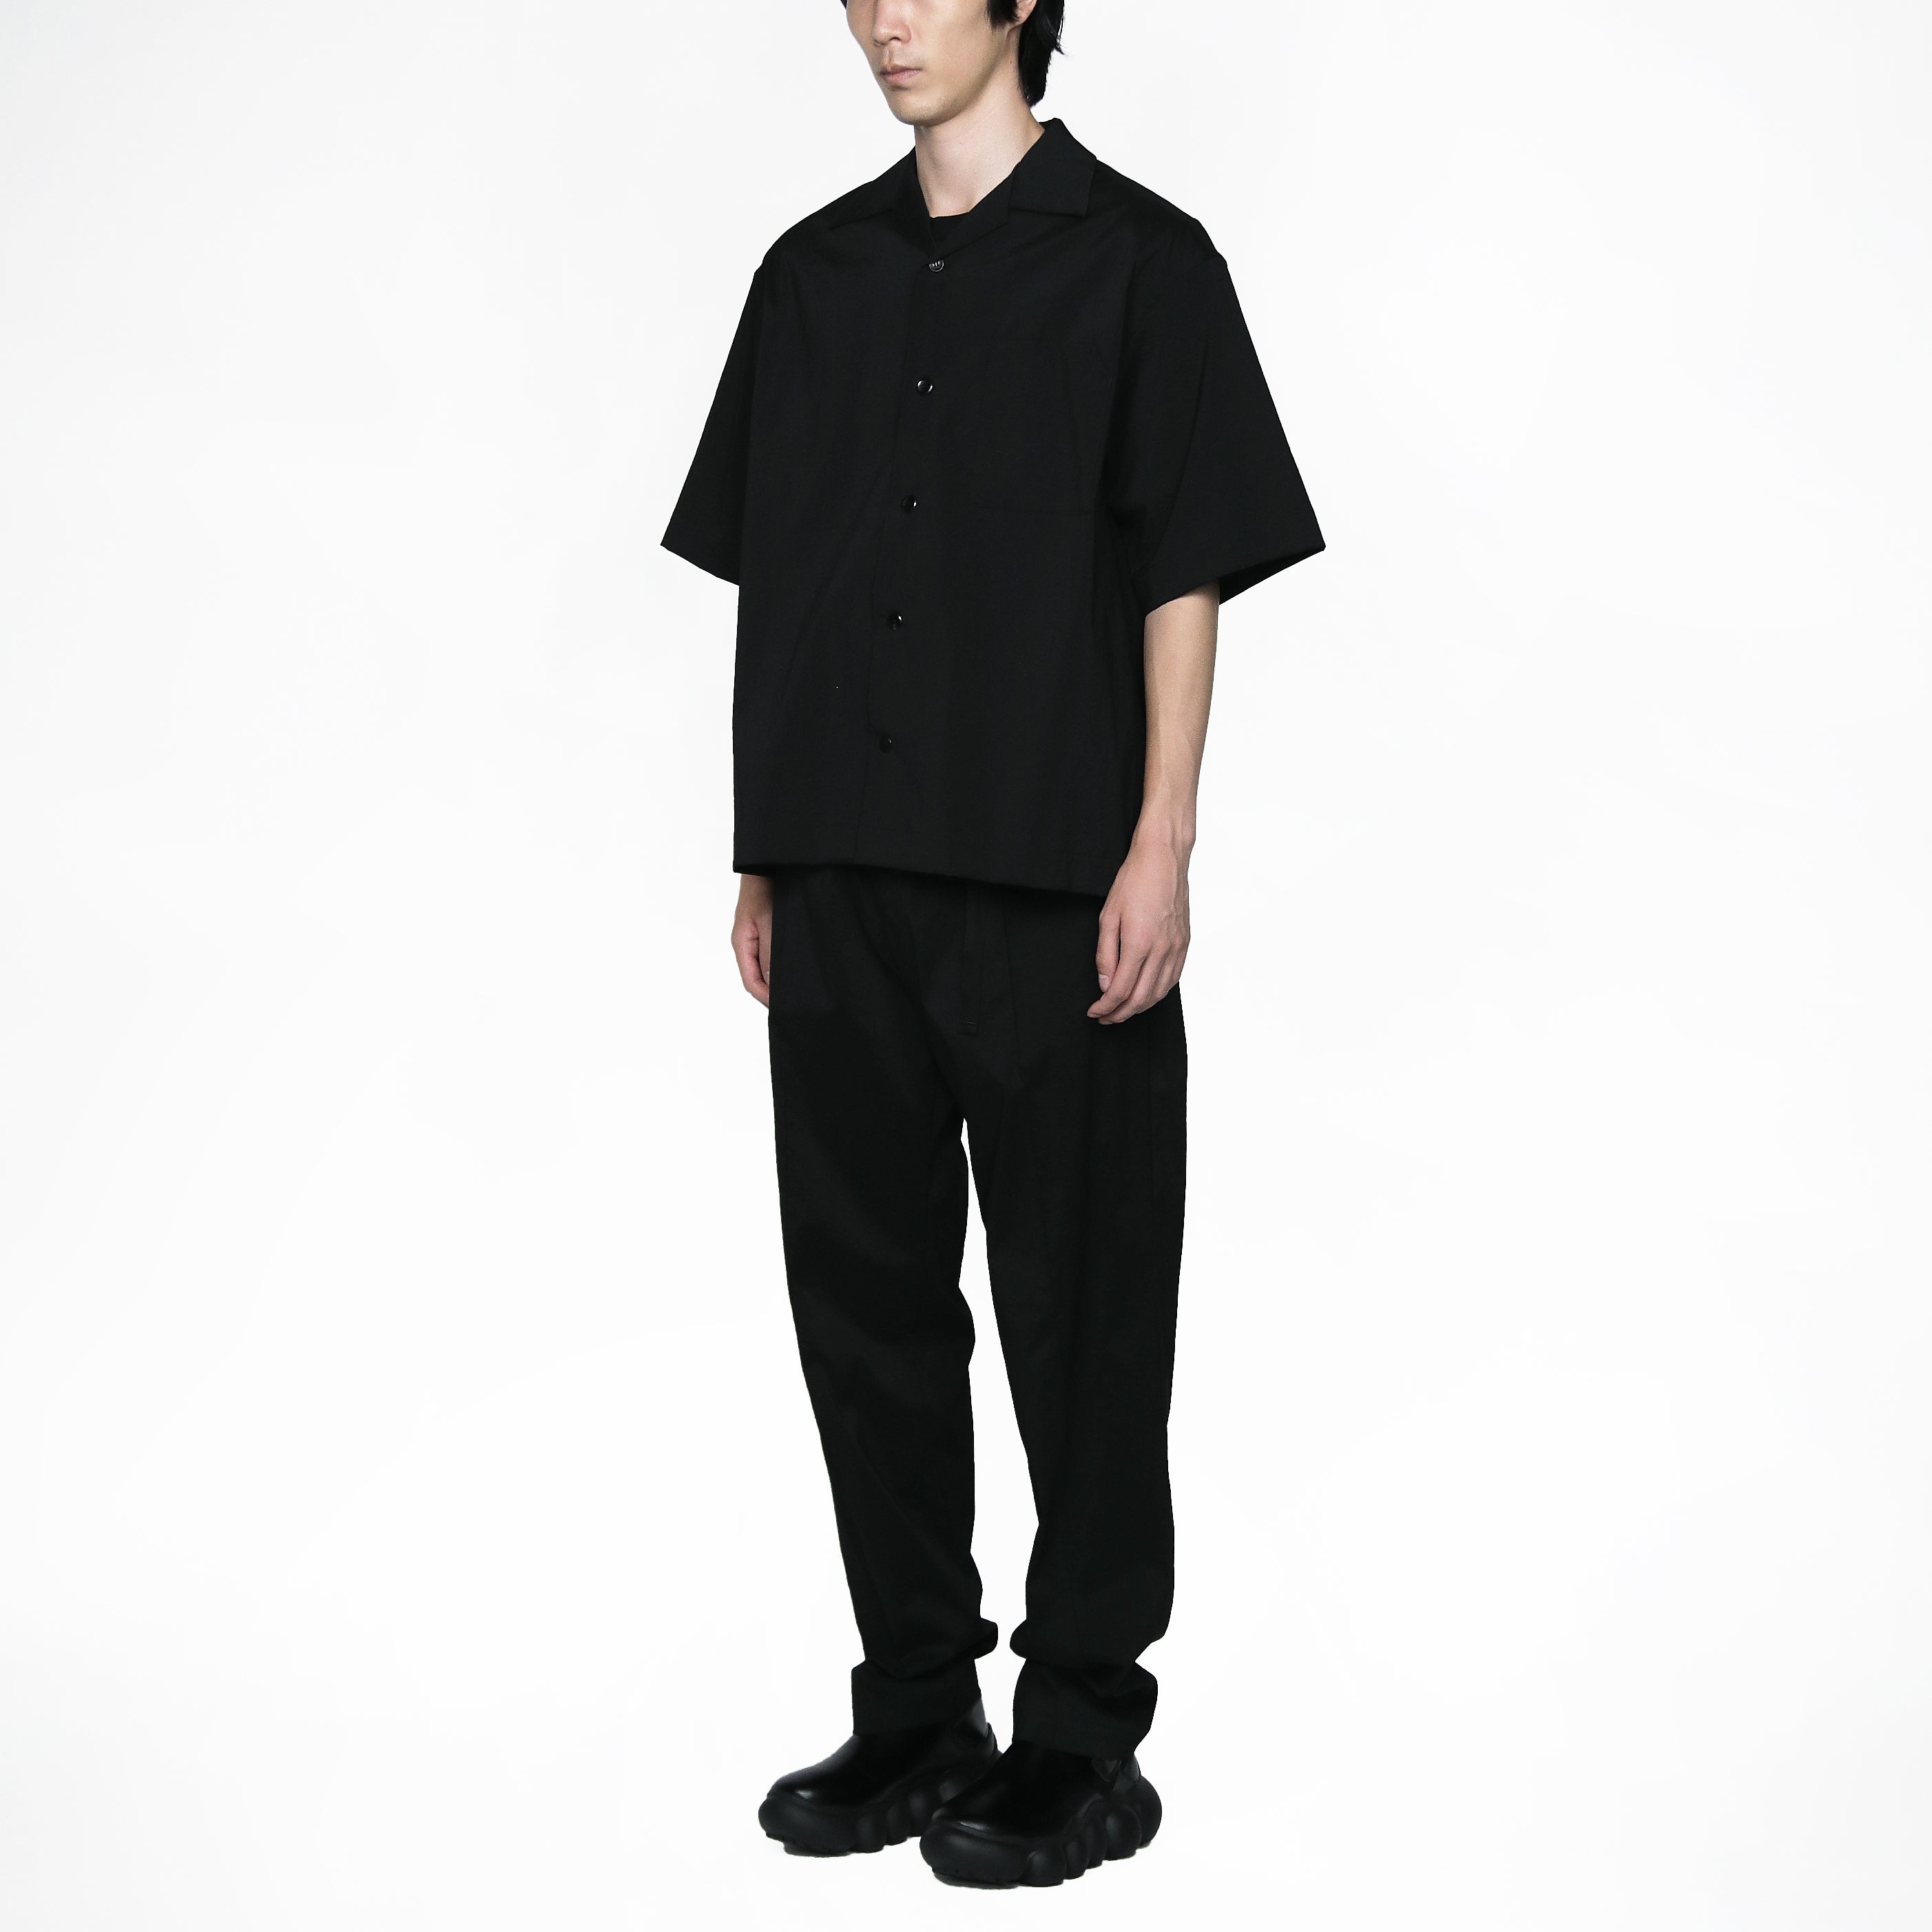 Open collar Shirt / black – th products